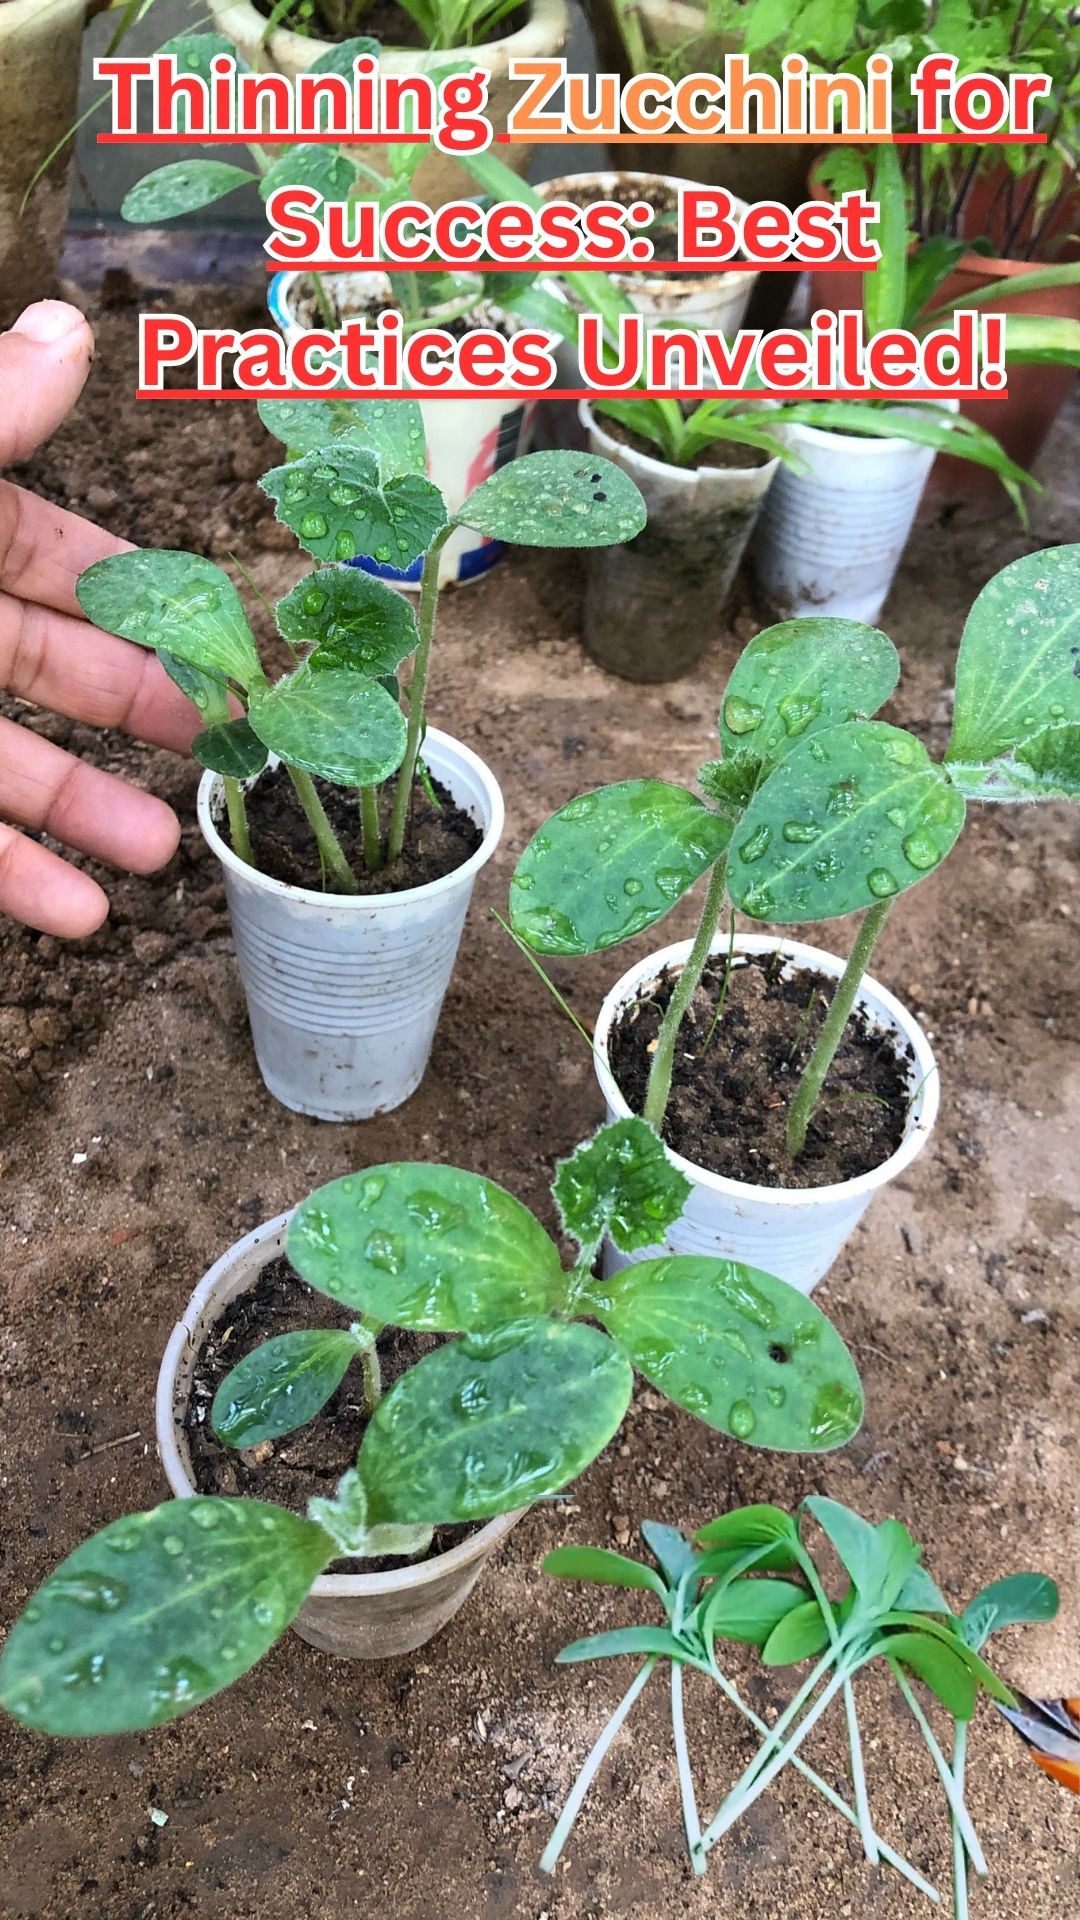 Thinning your zucchini seedlings is essential for encouraging their healthy growth and increasing your zucchini plants' yield. By carefully following the provided instructions, you can make sure that the remaining seedlings have enough room, nutrients, and care to prosper.